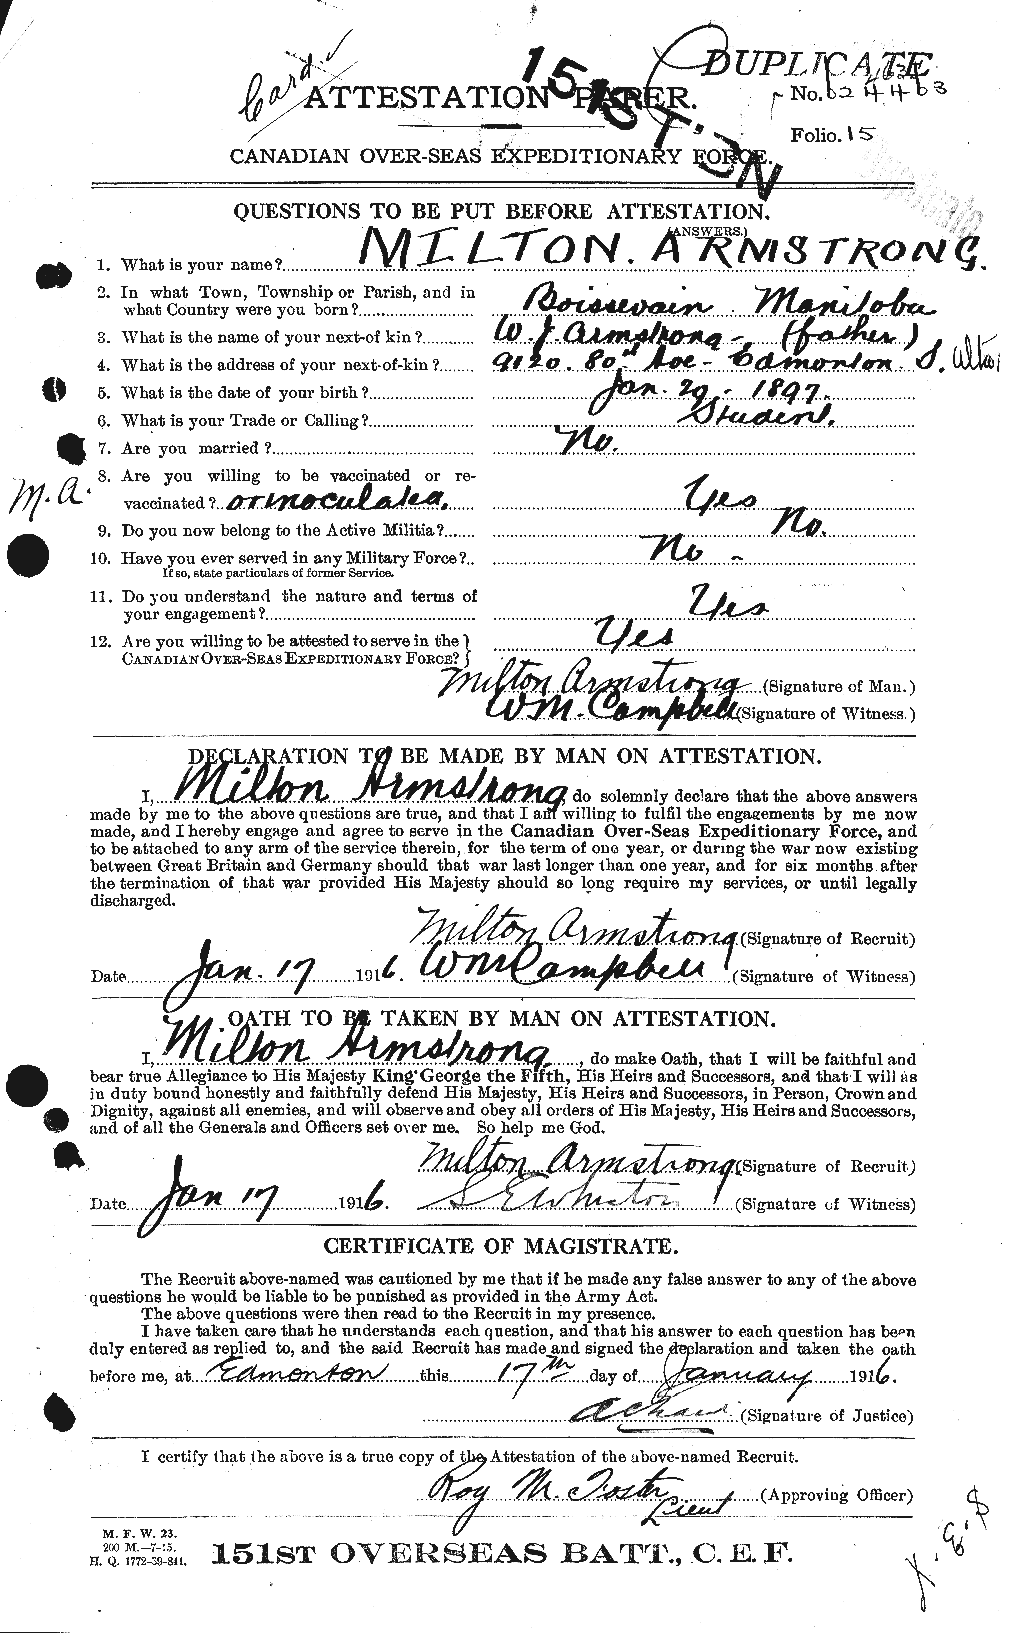 Personnel Records of the First World War - CEF 212749a